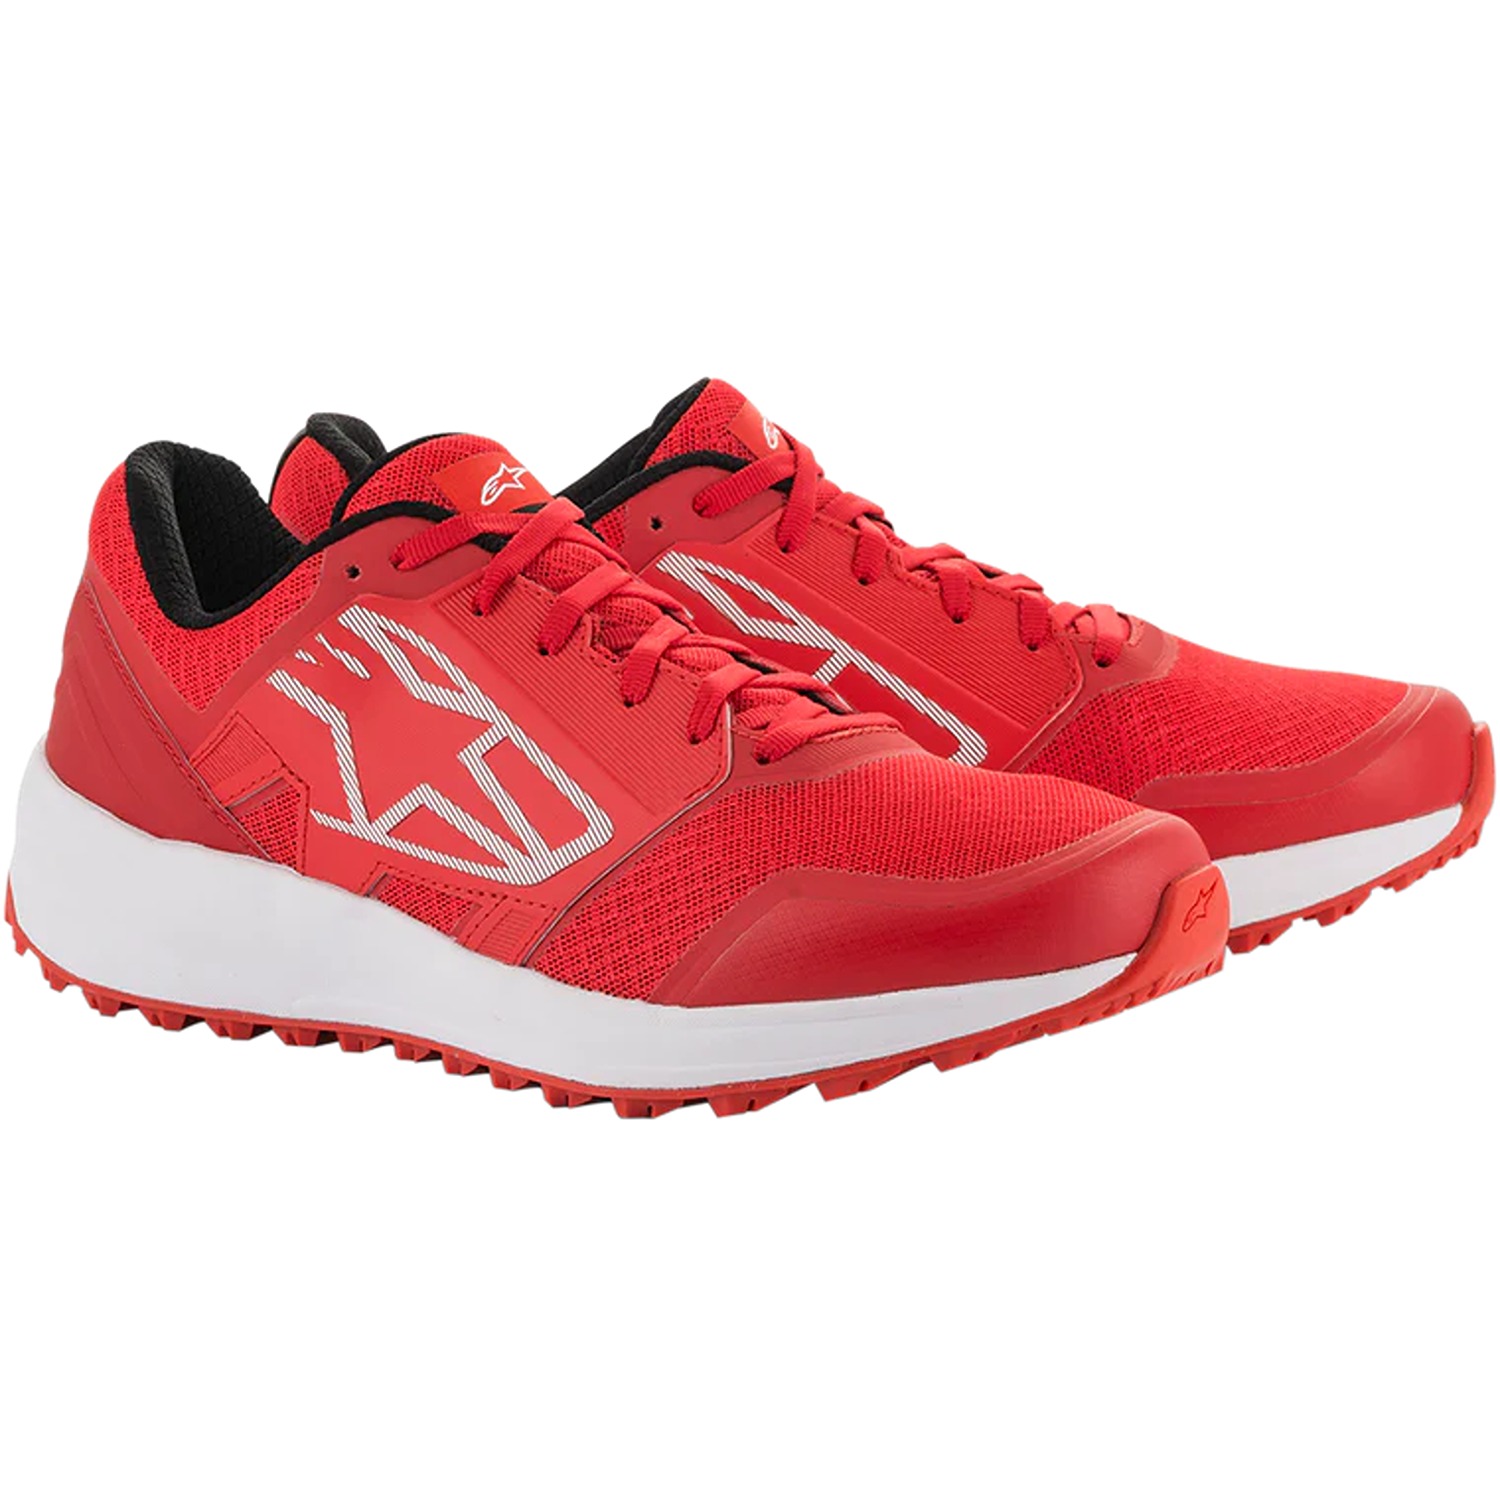 Image of Alpinestars Meta Trail Shoes Red White Taille US 9